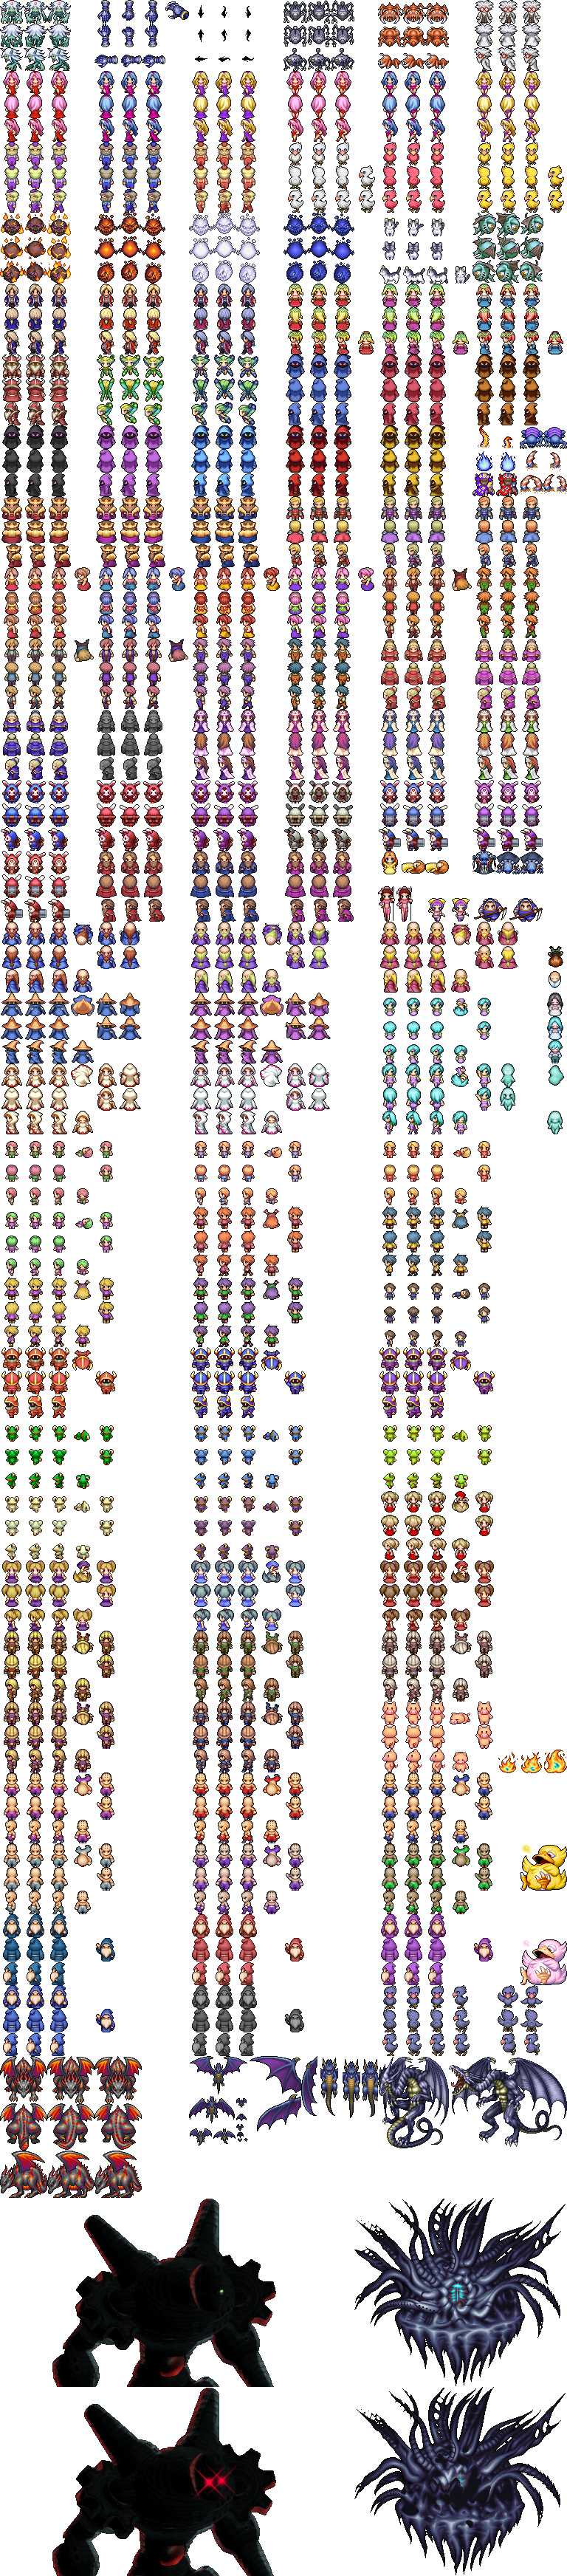 Final Fantasy 4: The Complete Collection - The After Years - NPCs